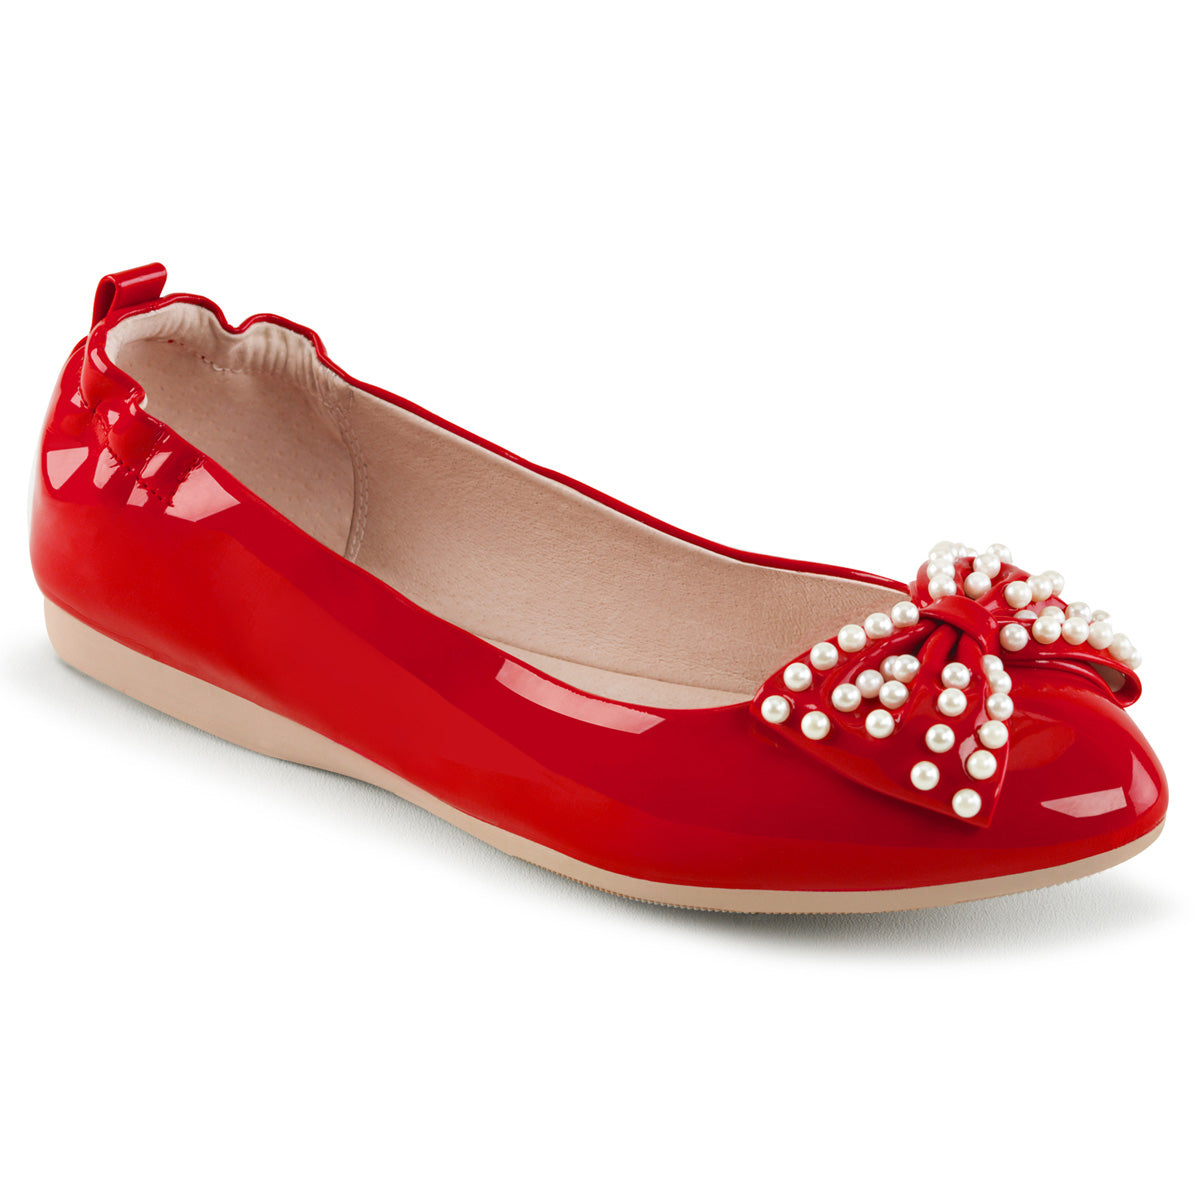 Ivy-09 Pino Up Couture Red Hollywood Pantofi Glamour